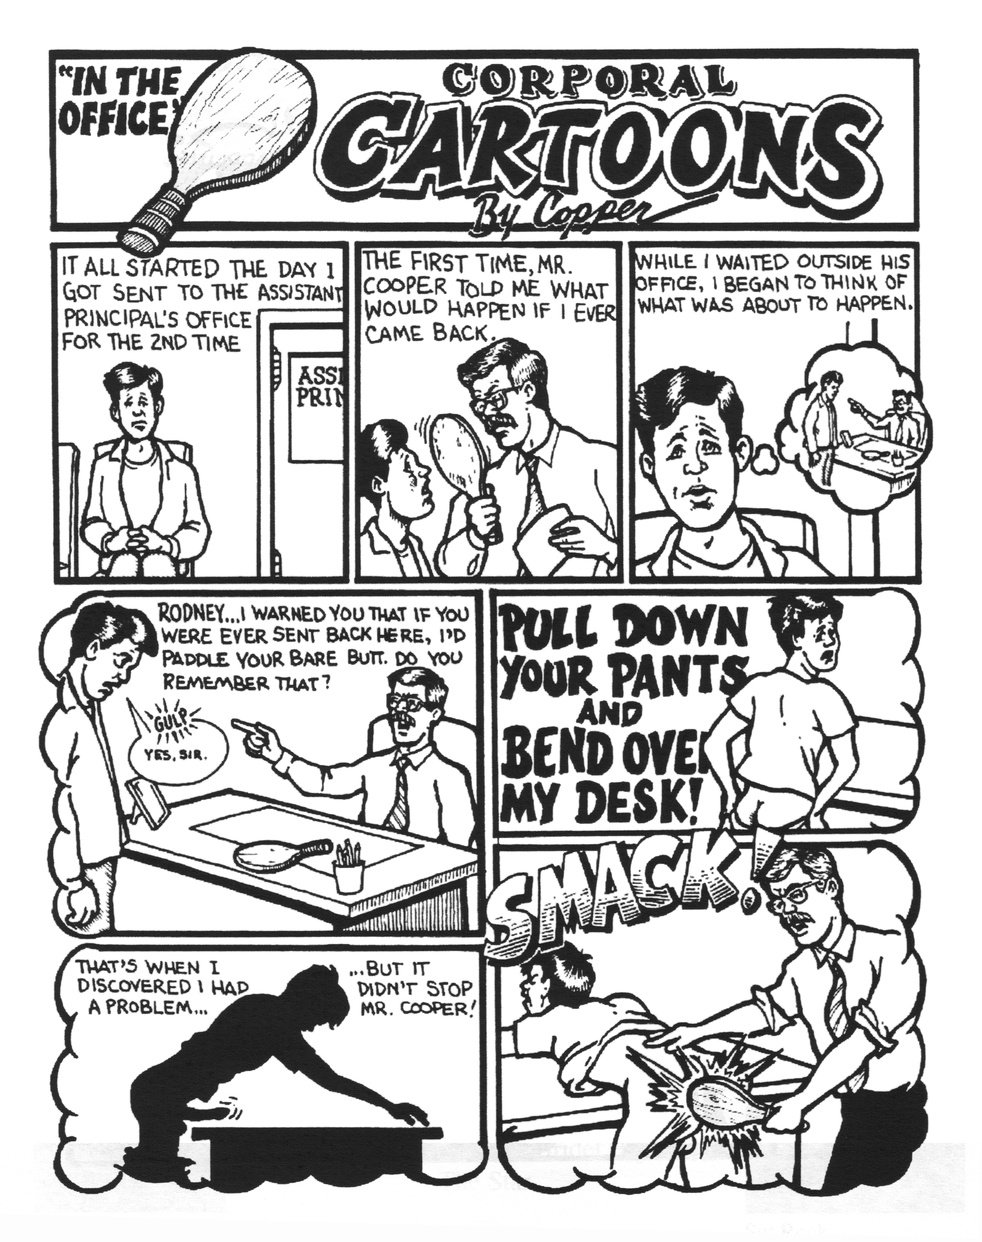 Corporal Cartoons %22In the Office%22_1.jpeg